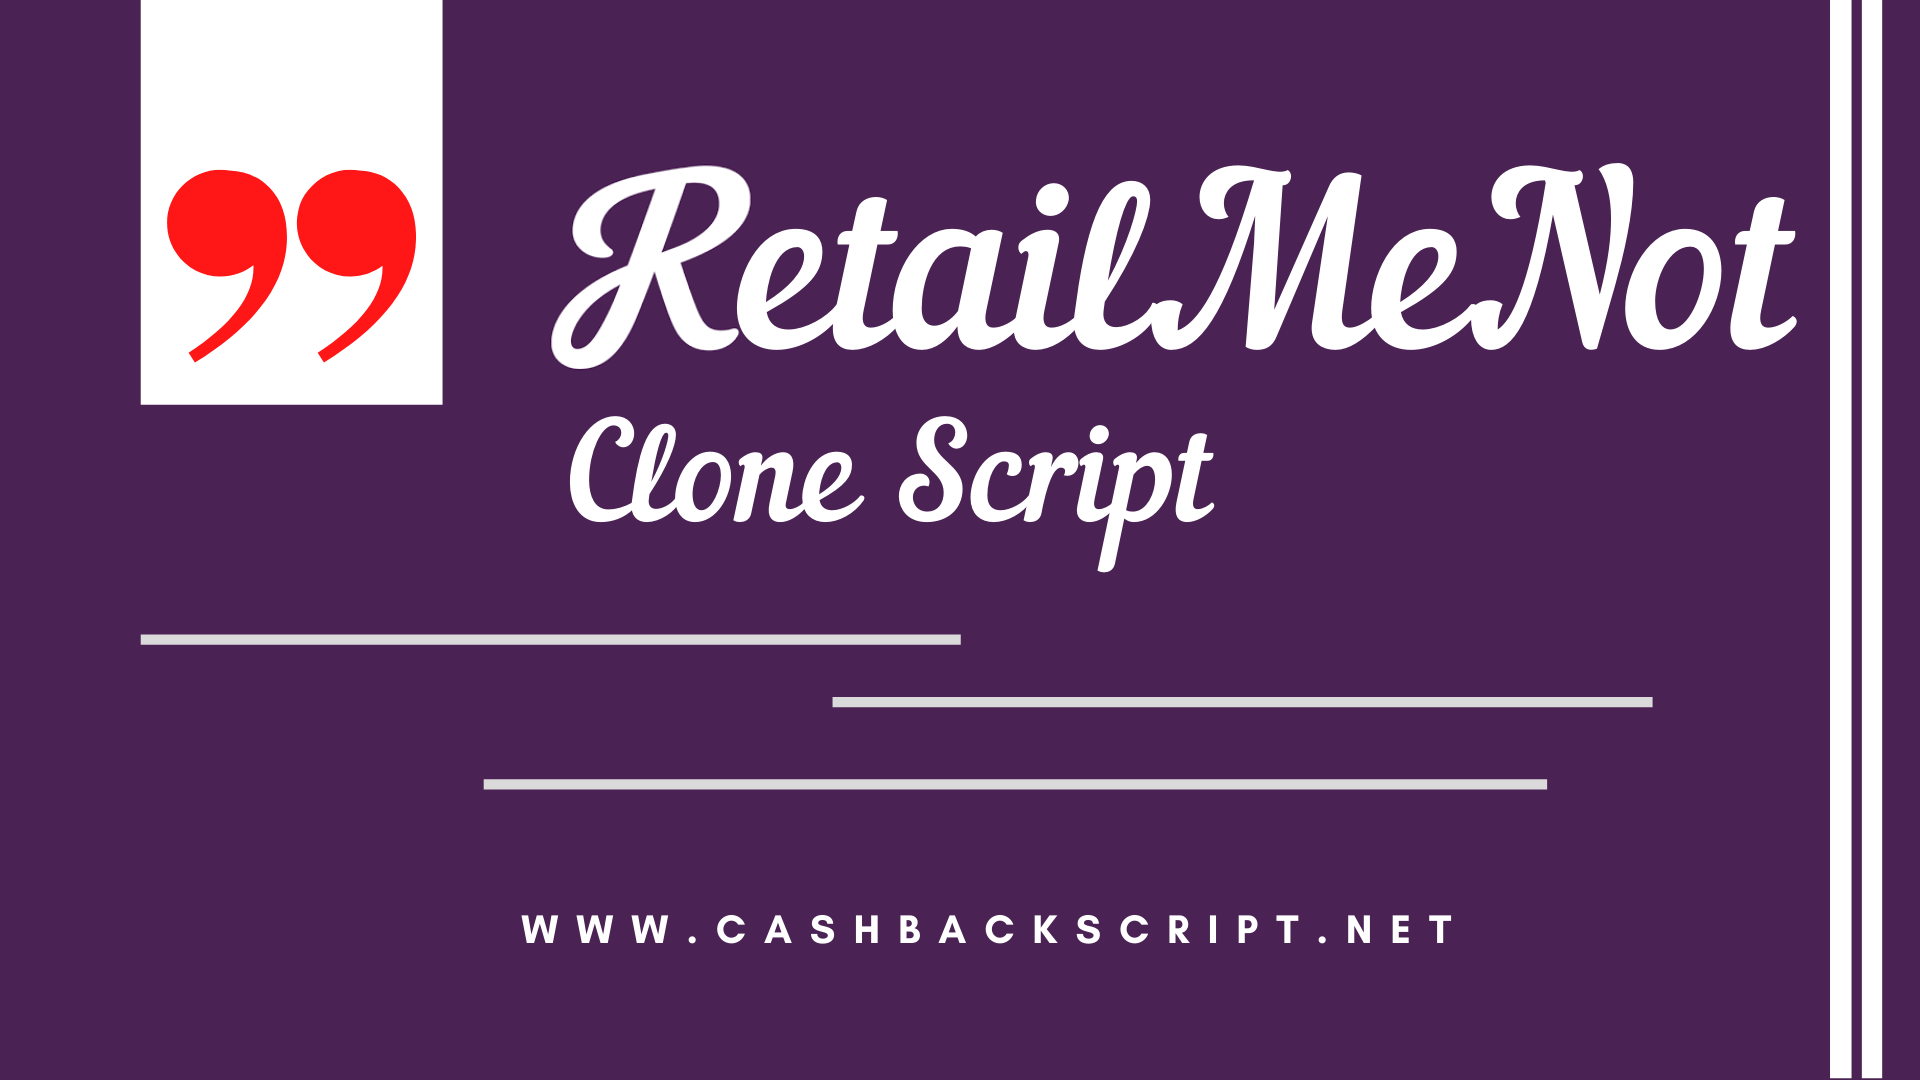 RetailMeNot Clone Script: All the Stats, Facts, and Data You'll Ever Need to Know